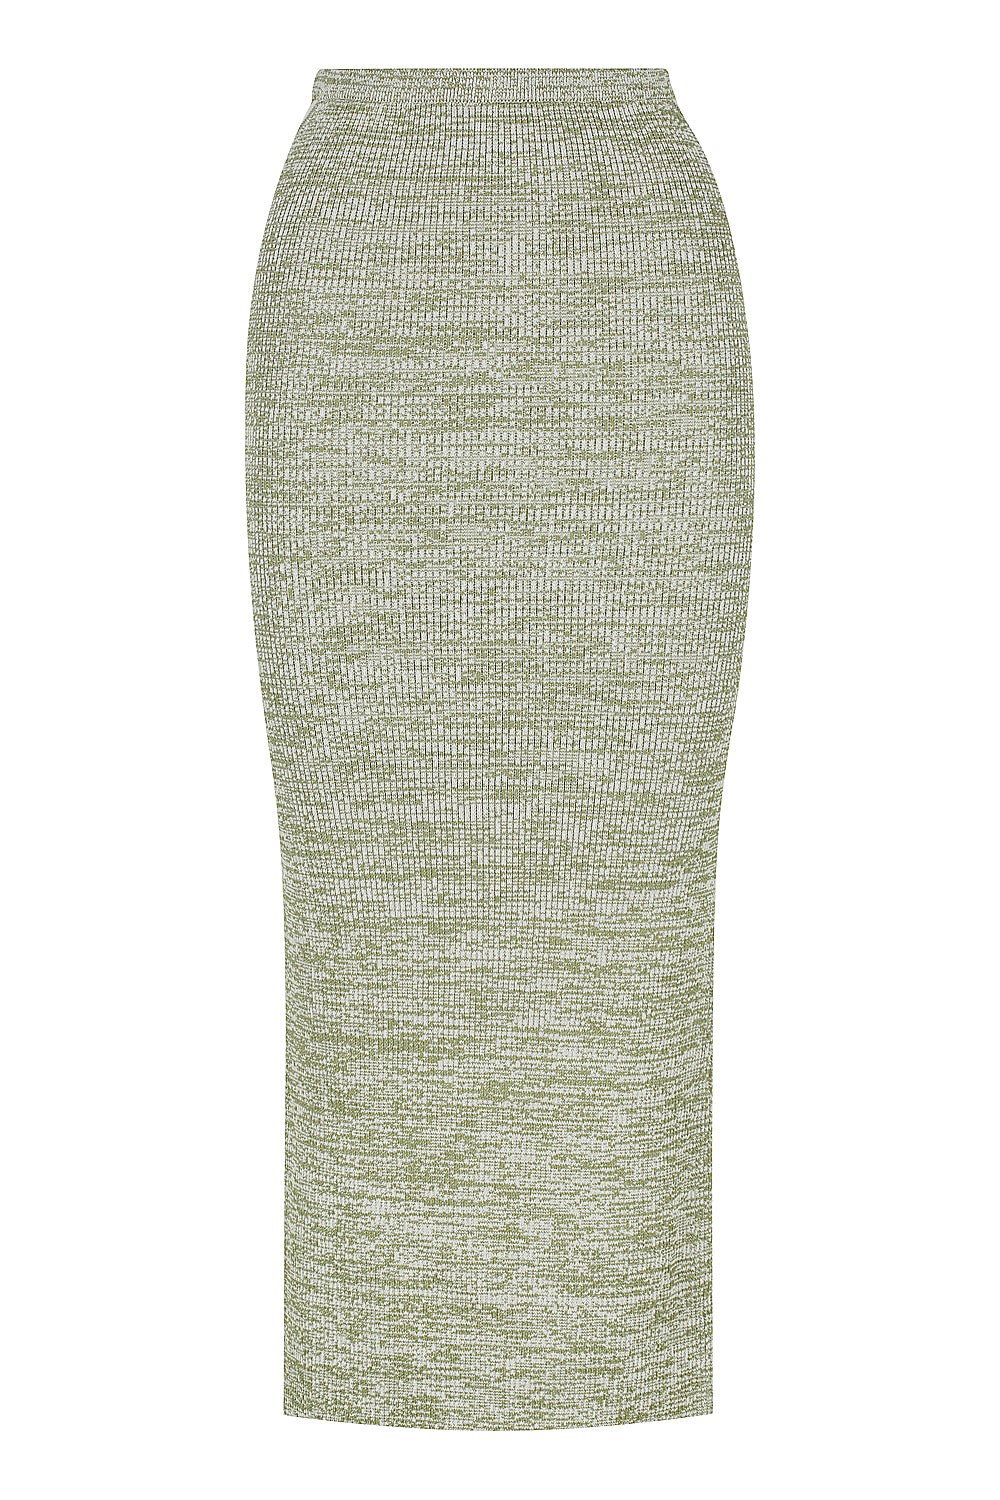 The Cut it Out Knit Skirt - Olive / Cream